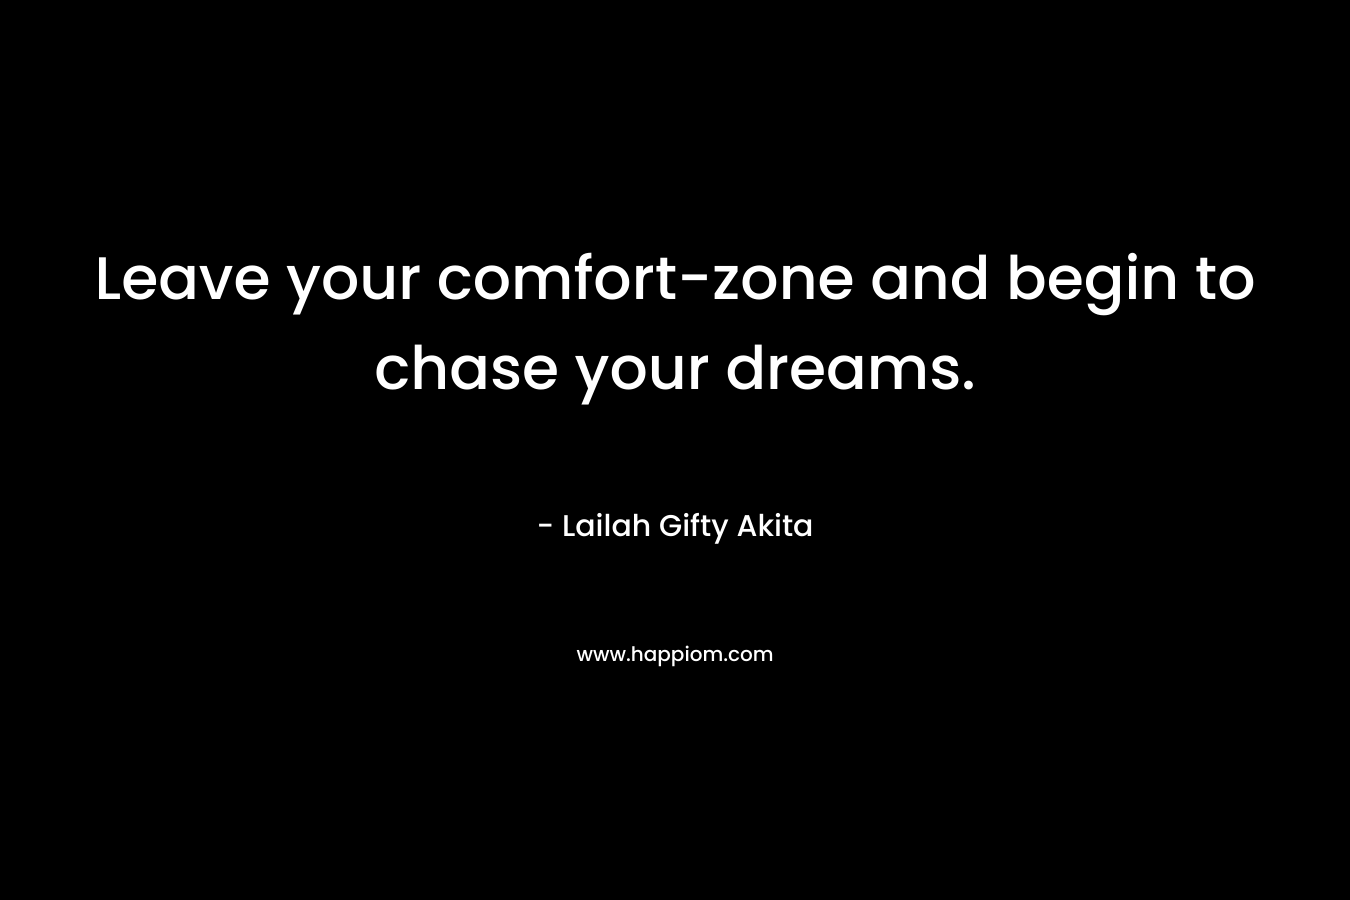 Leave your comfort-zone and begin to chase your dreams.